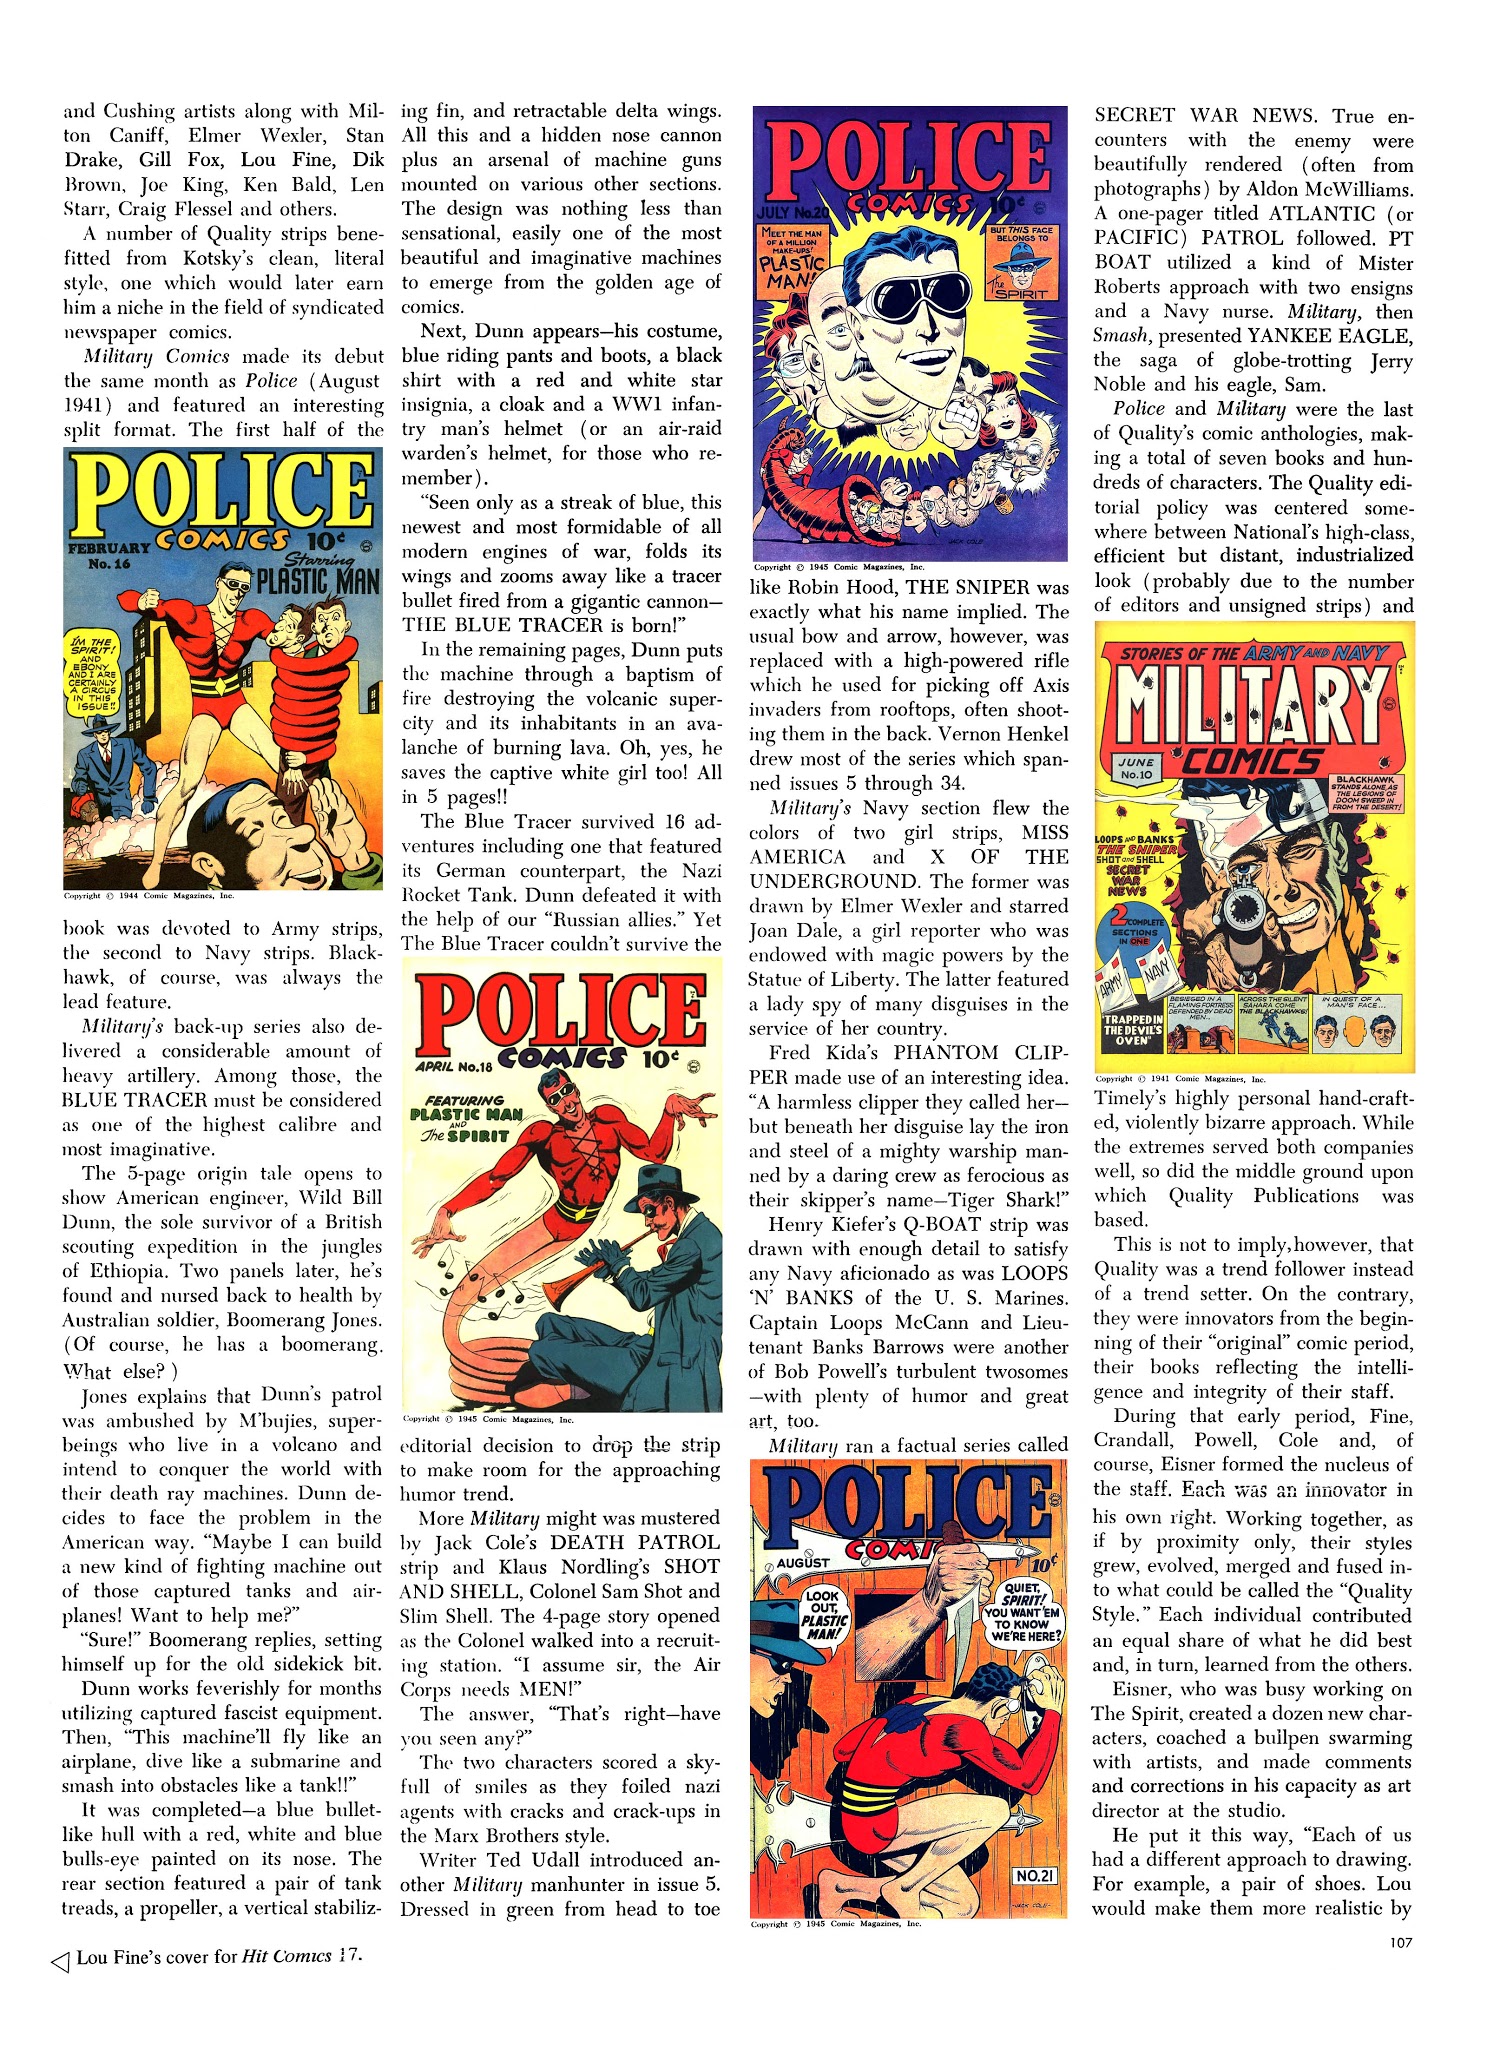 Read online The Steranko History of Comics comic -  Issue # TPB 2 - 106